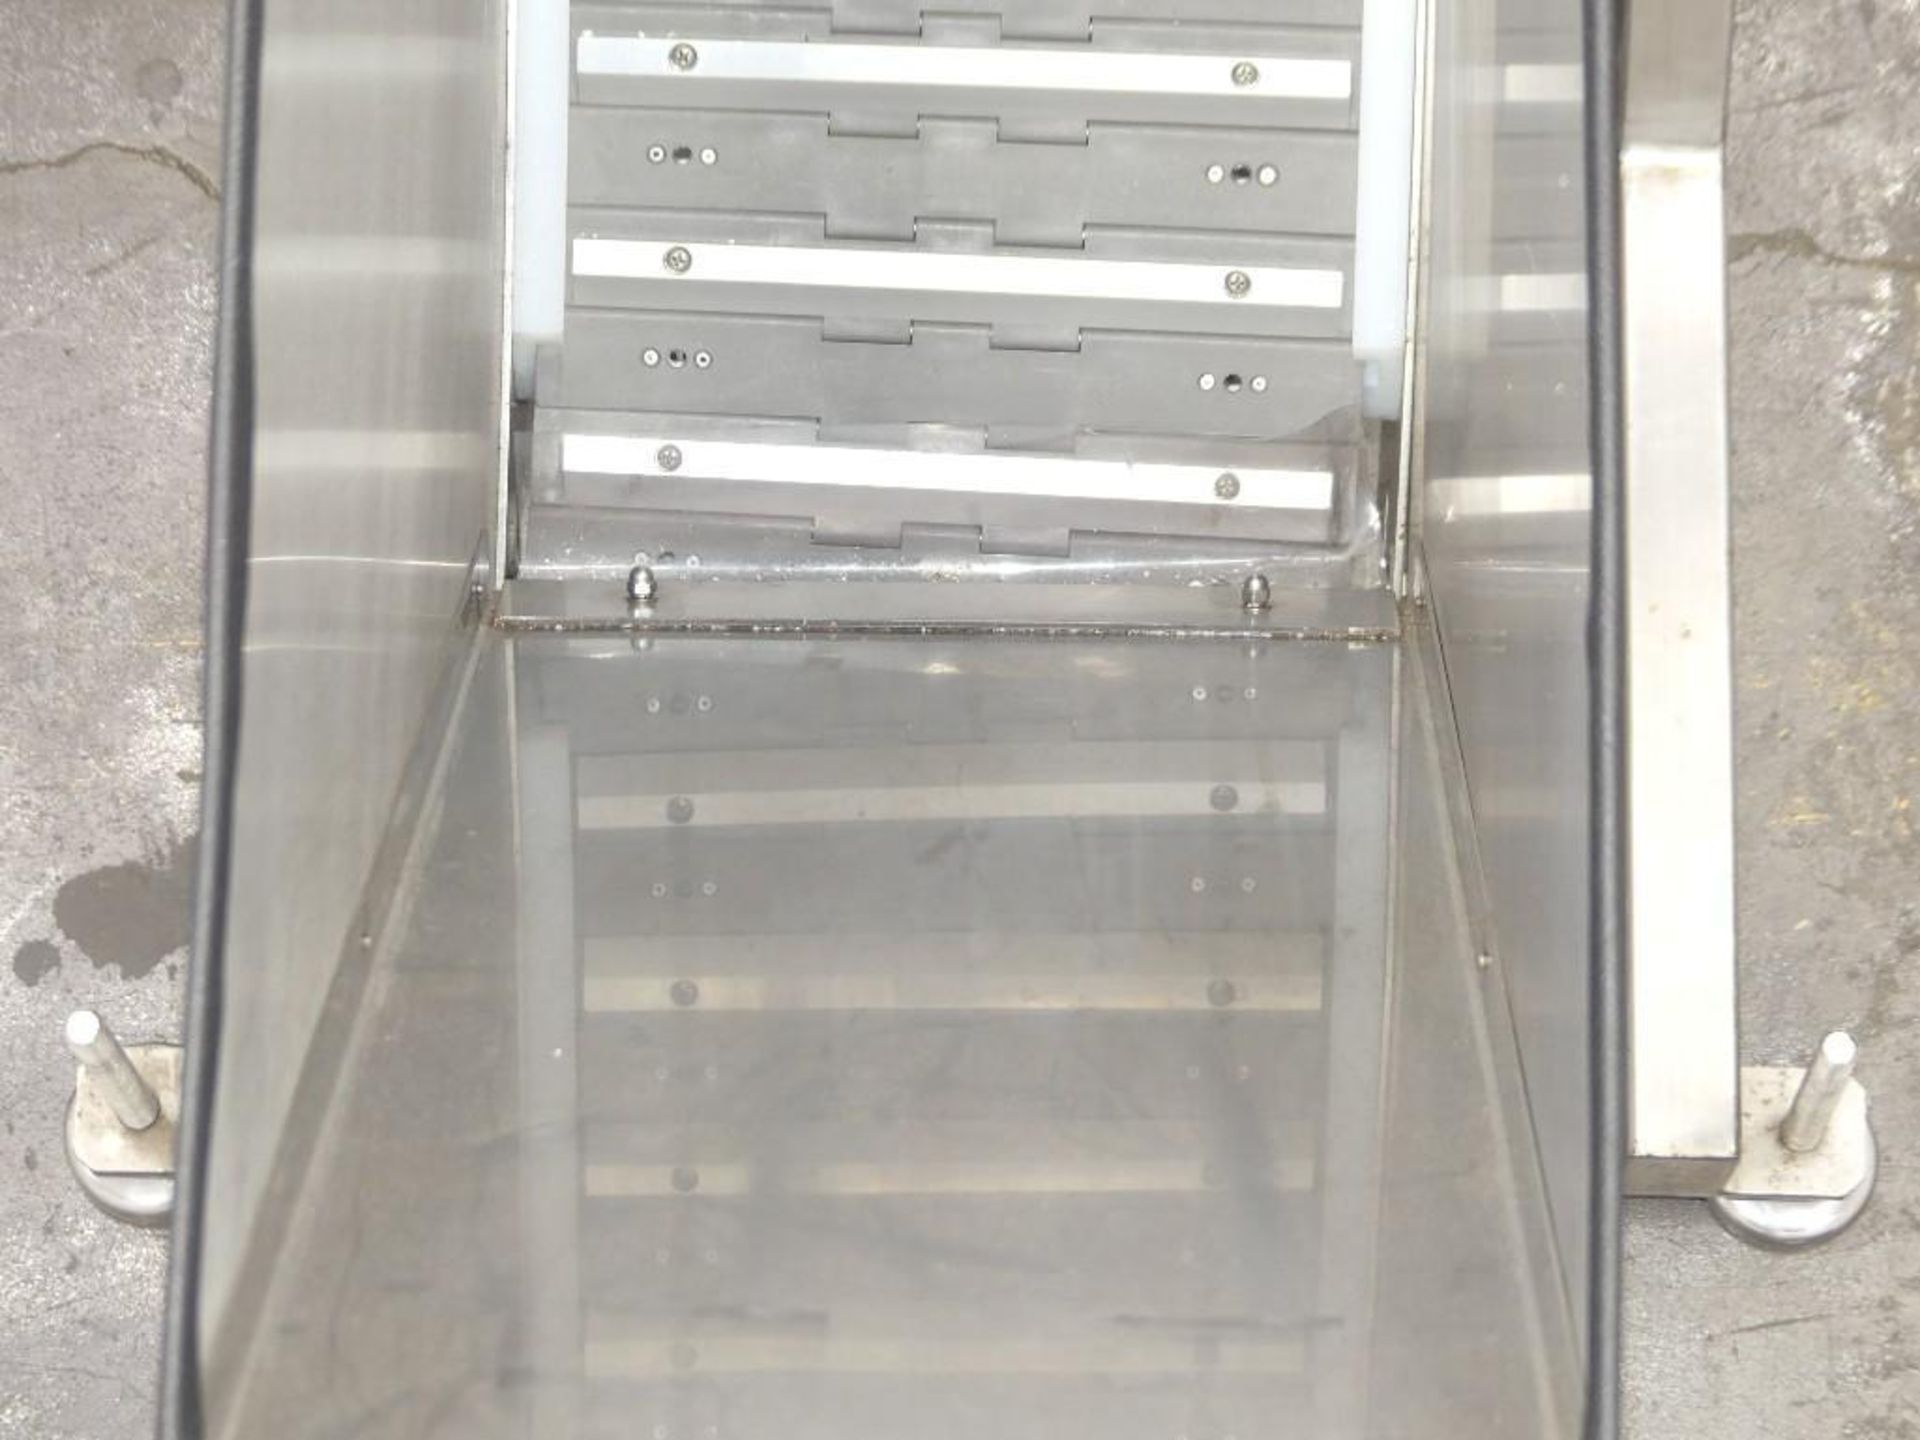 2019 AccuTek Packaging Equipment Co. 50-C0E-CH2 Stainless Steel Cap Loader Elevator - Image 7 of 25